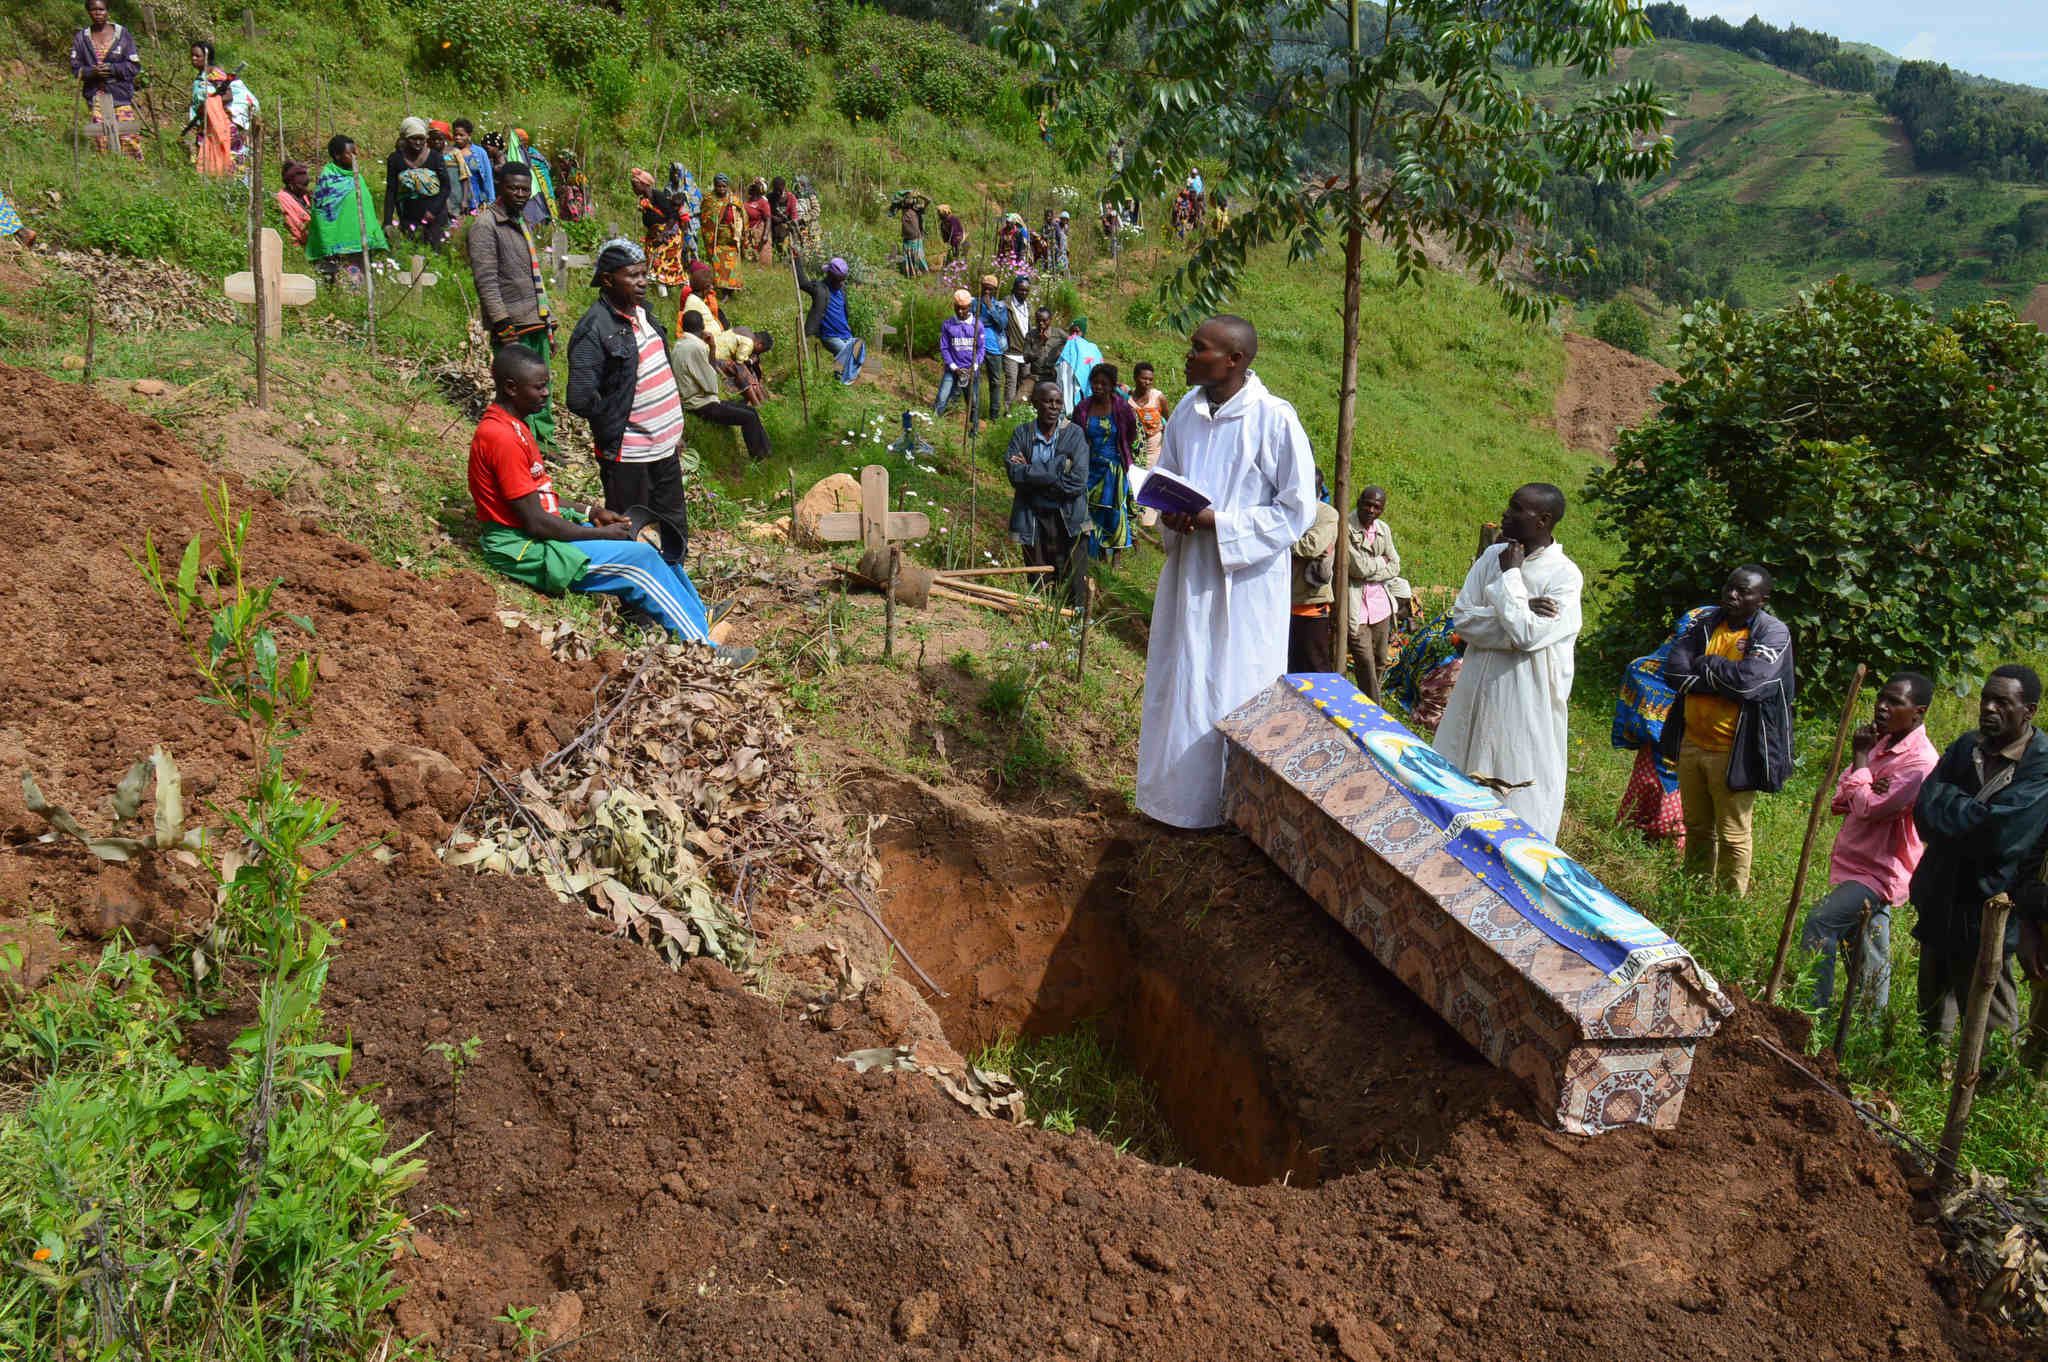 In Urban DRC, Chaos Reigns as Mourners Abandon Funeral Traditions